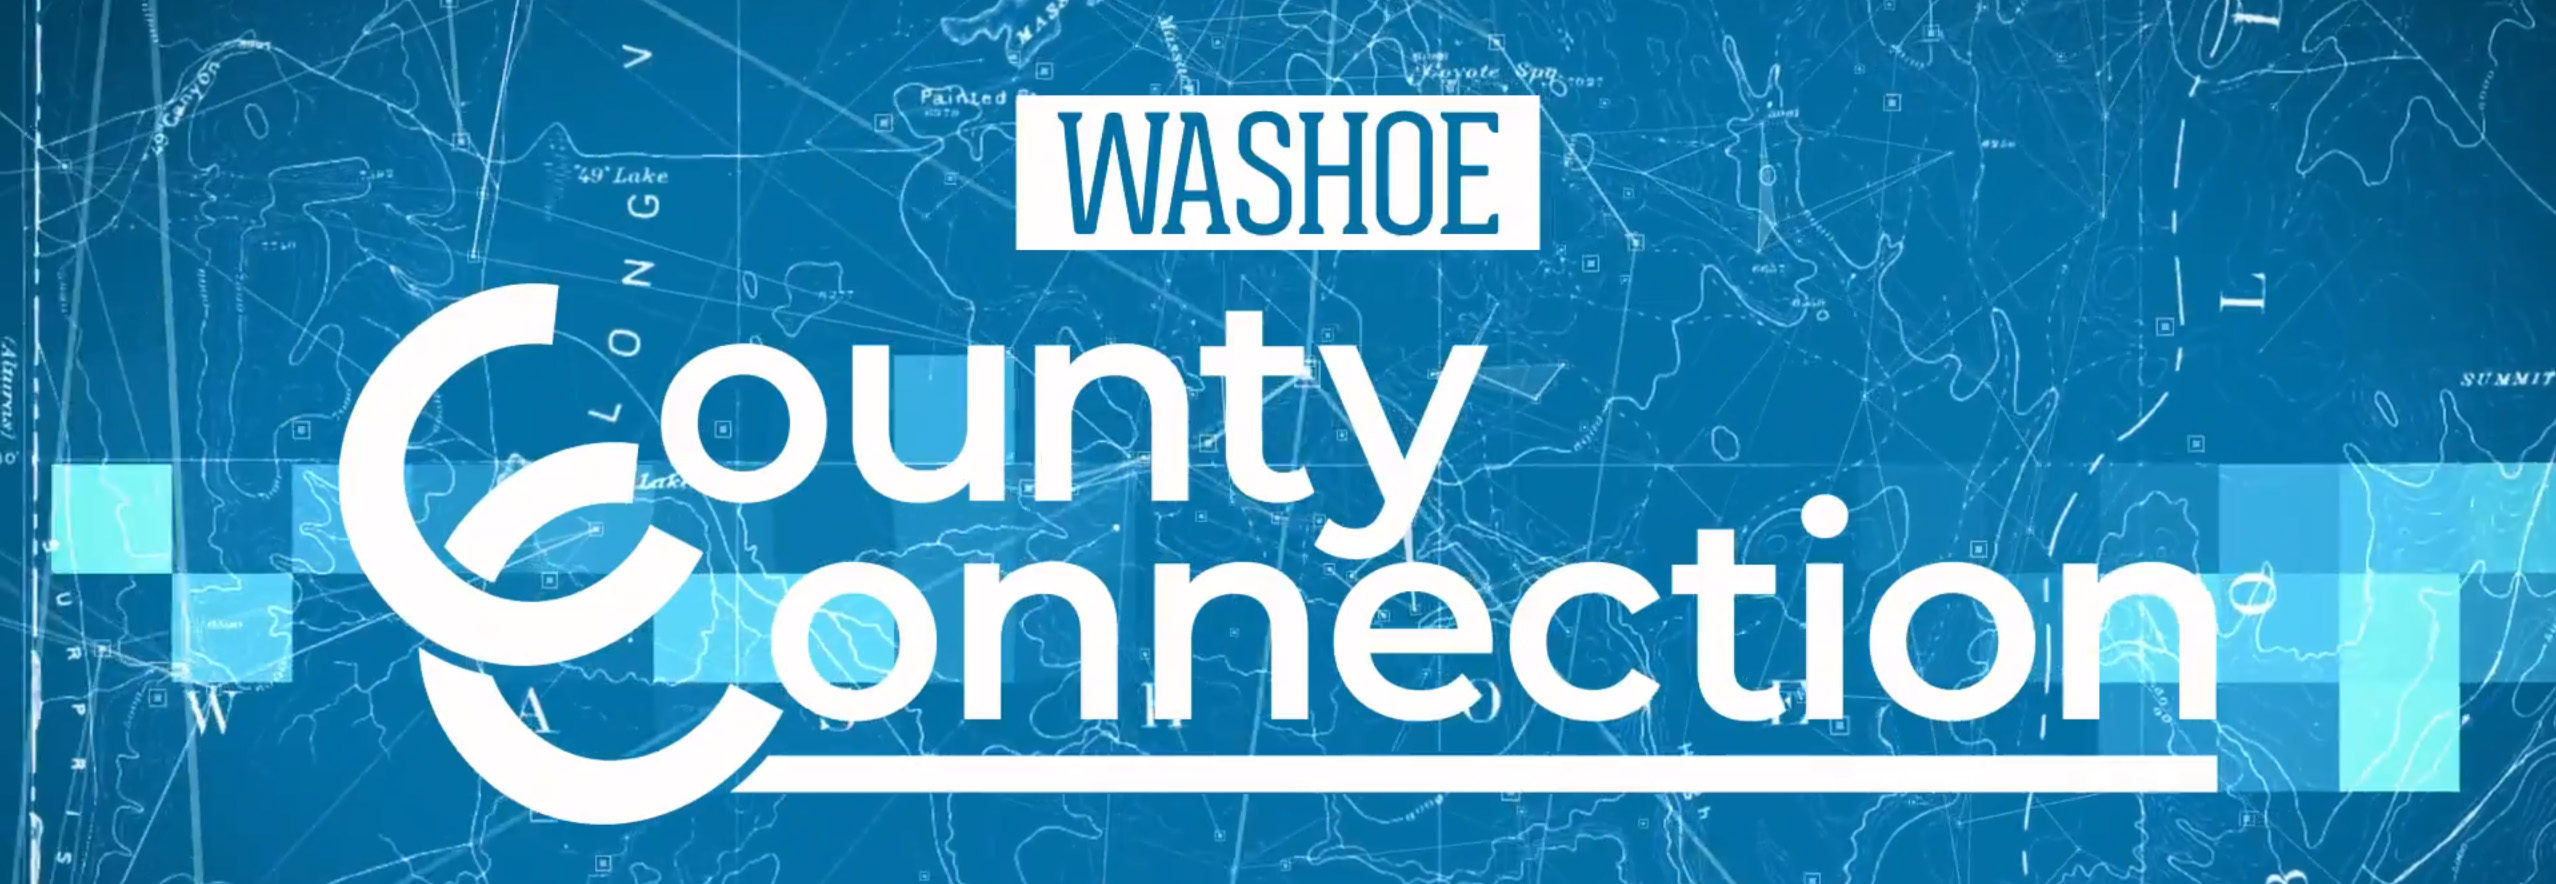 Washoe County Connection